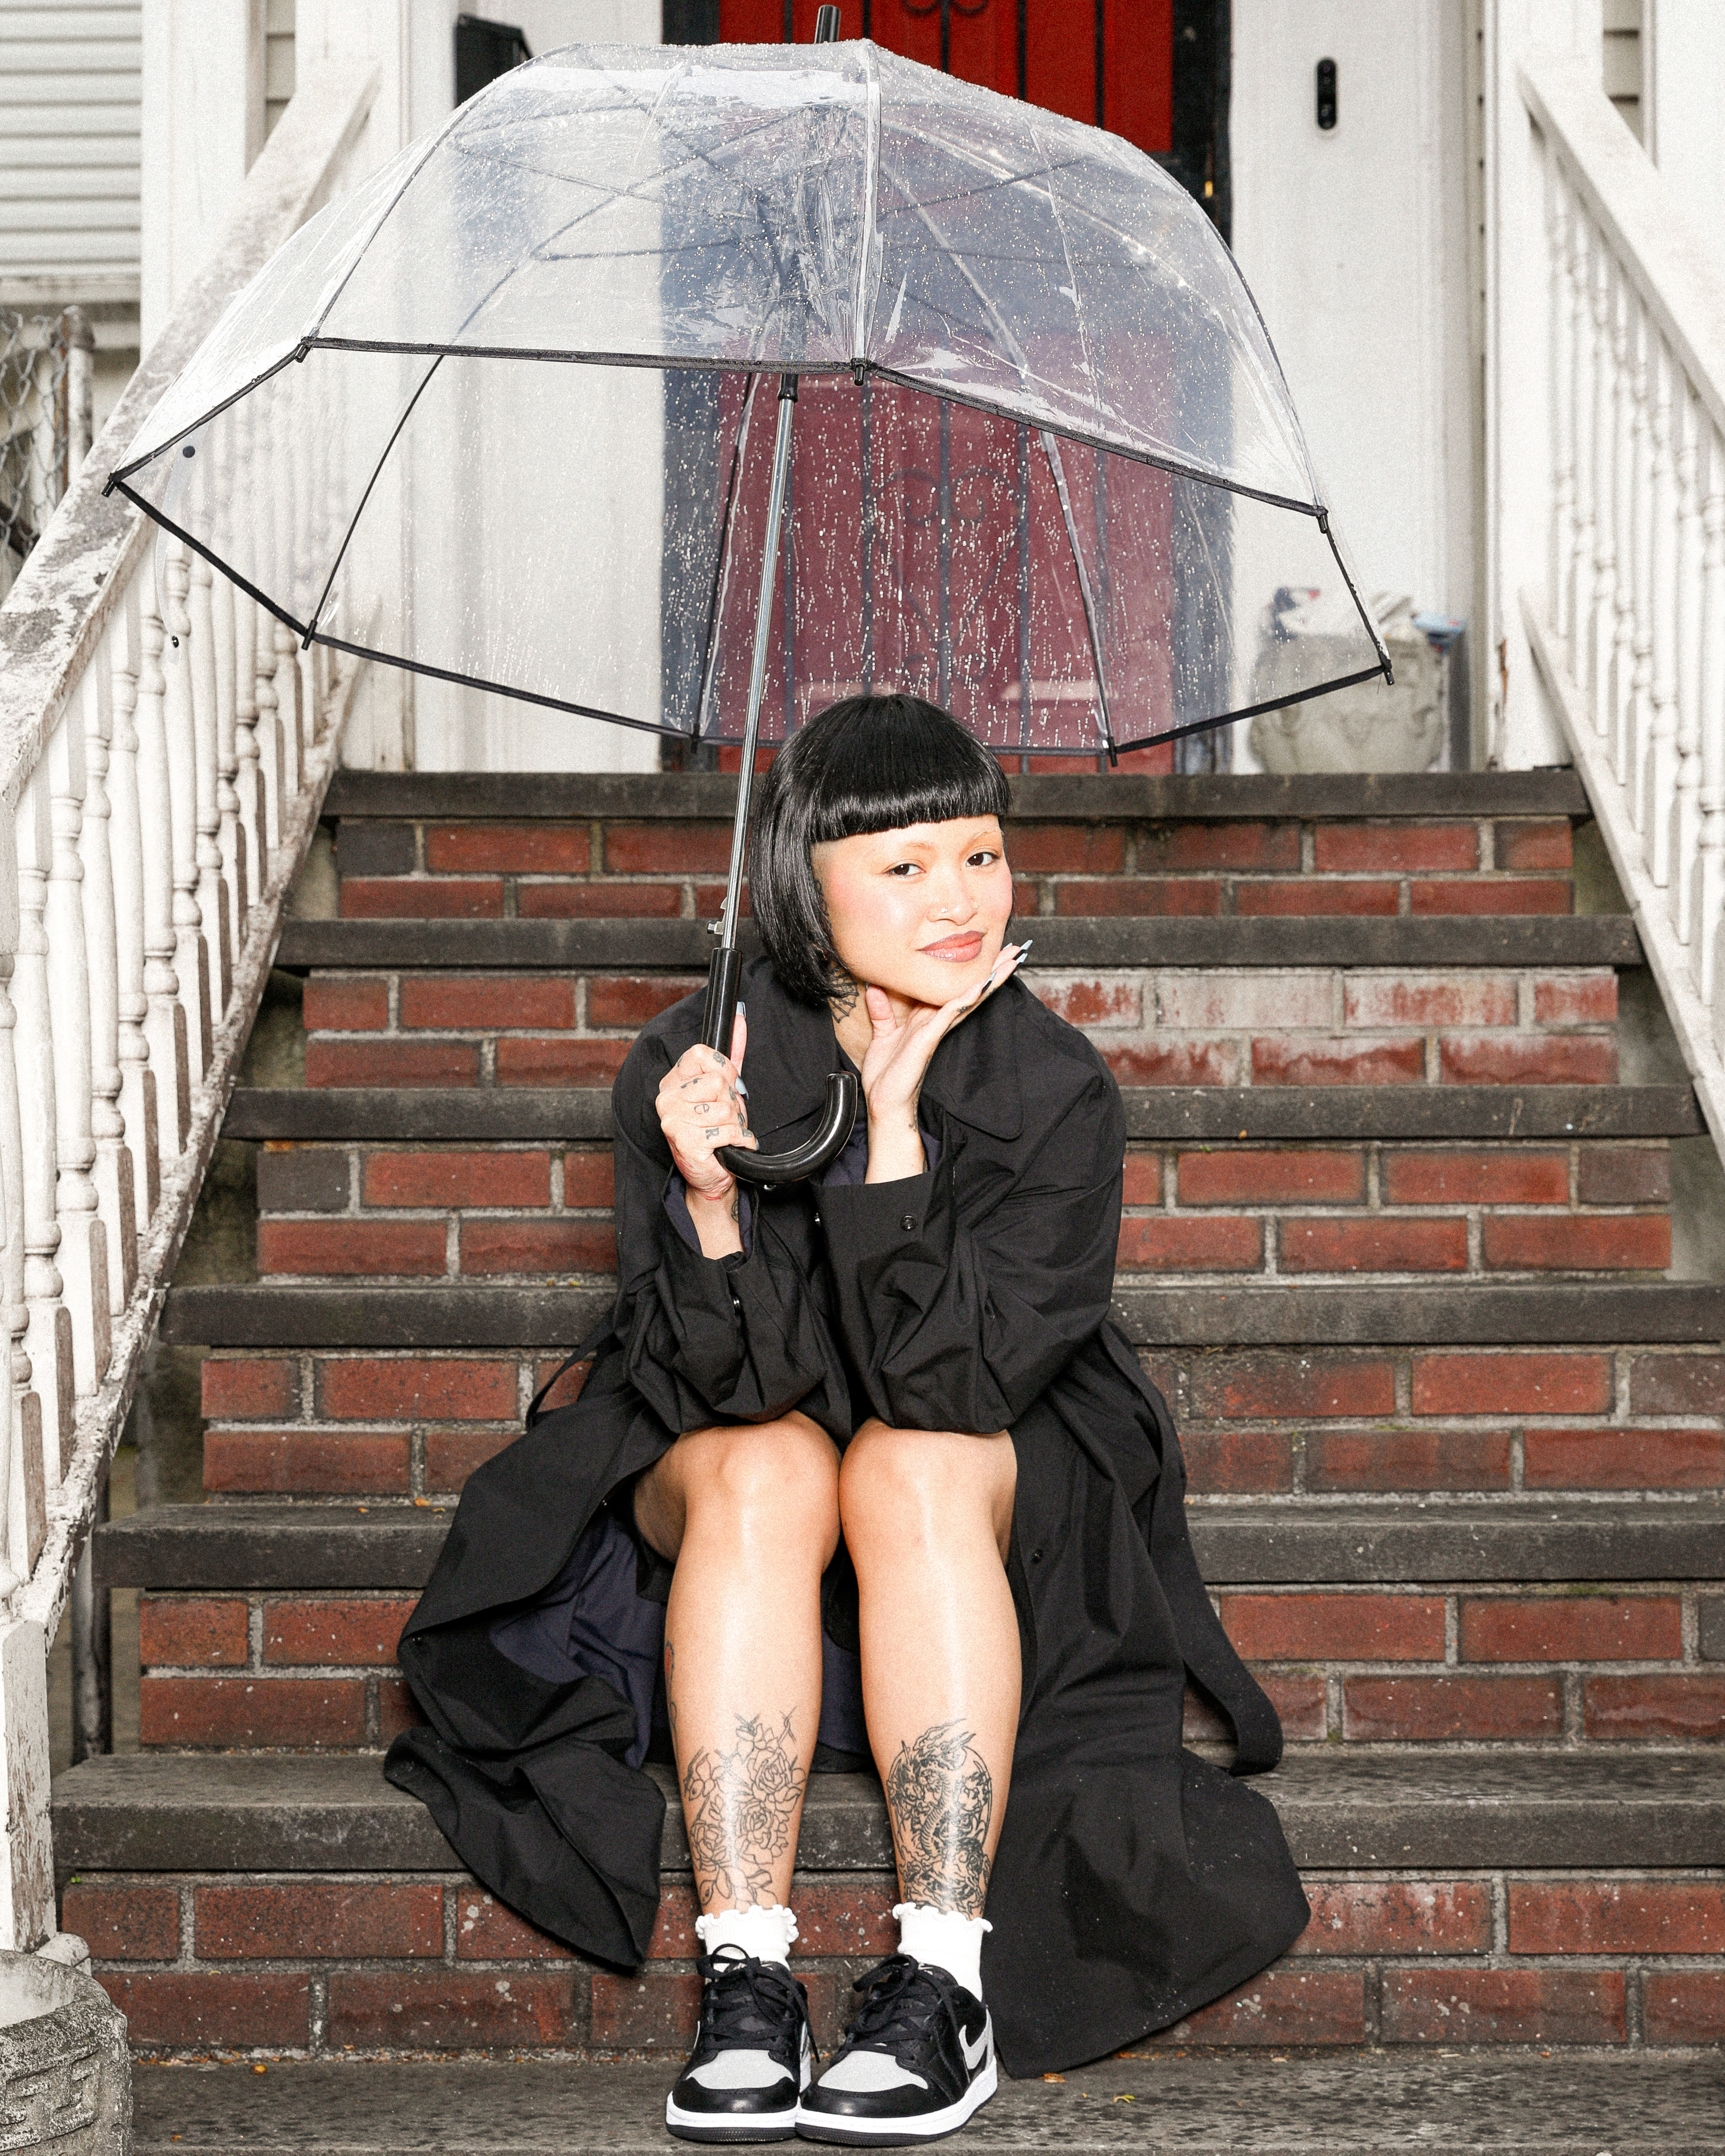 Person sitting on steps under a clear umbrella, wearing a black coat and patterned sneakers